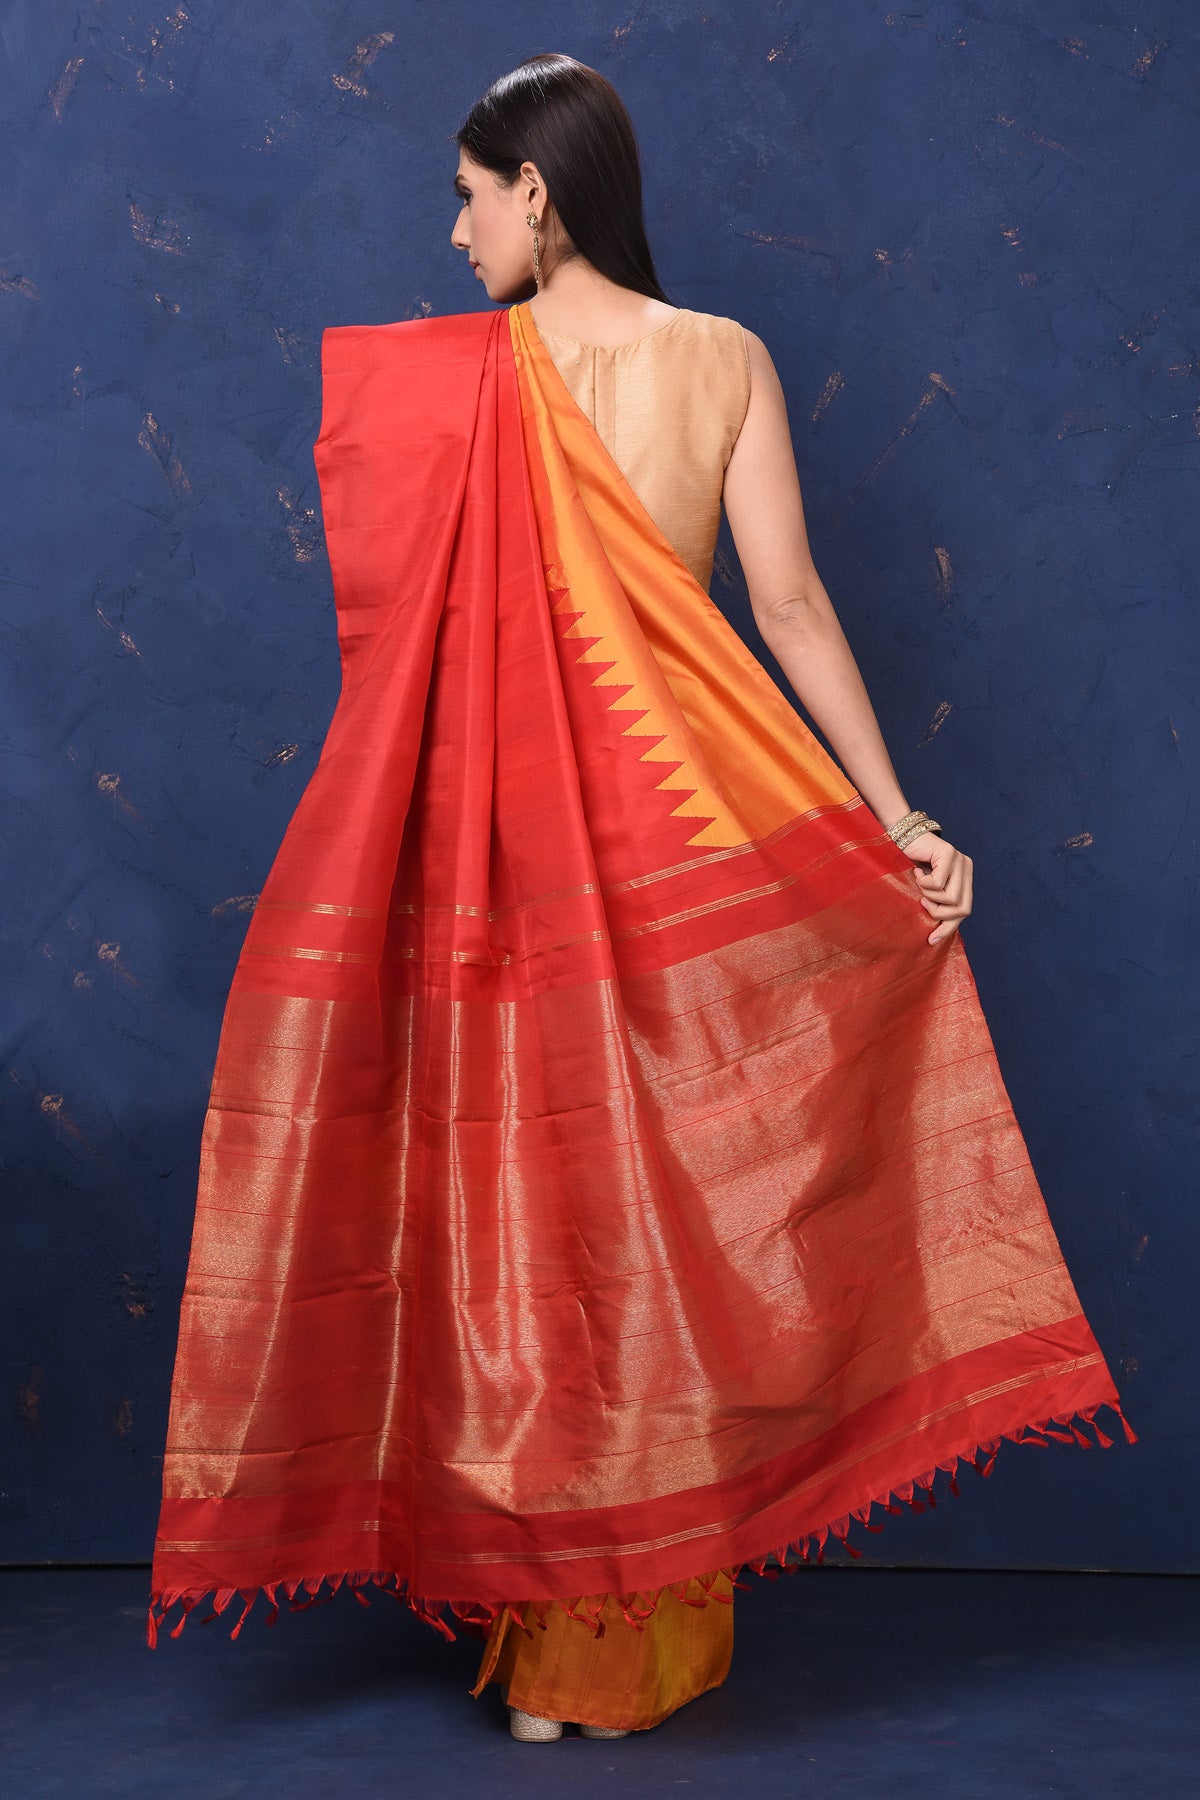 Buy beautiful orange Kanjivaram silk saree online in USA with red temple border. Flaunt your ethnic style at weddings and festive occasions in exquisite Indian sarees, Kanjeevaram sarees, handloom sarees, designer sarees, embroidered sarees from Pure Elegance Indian saree store in USA.-back